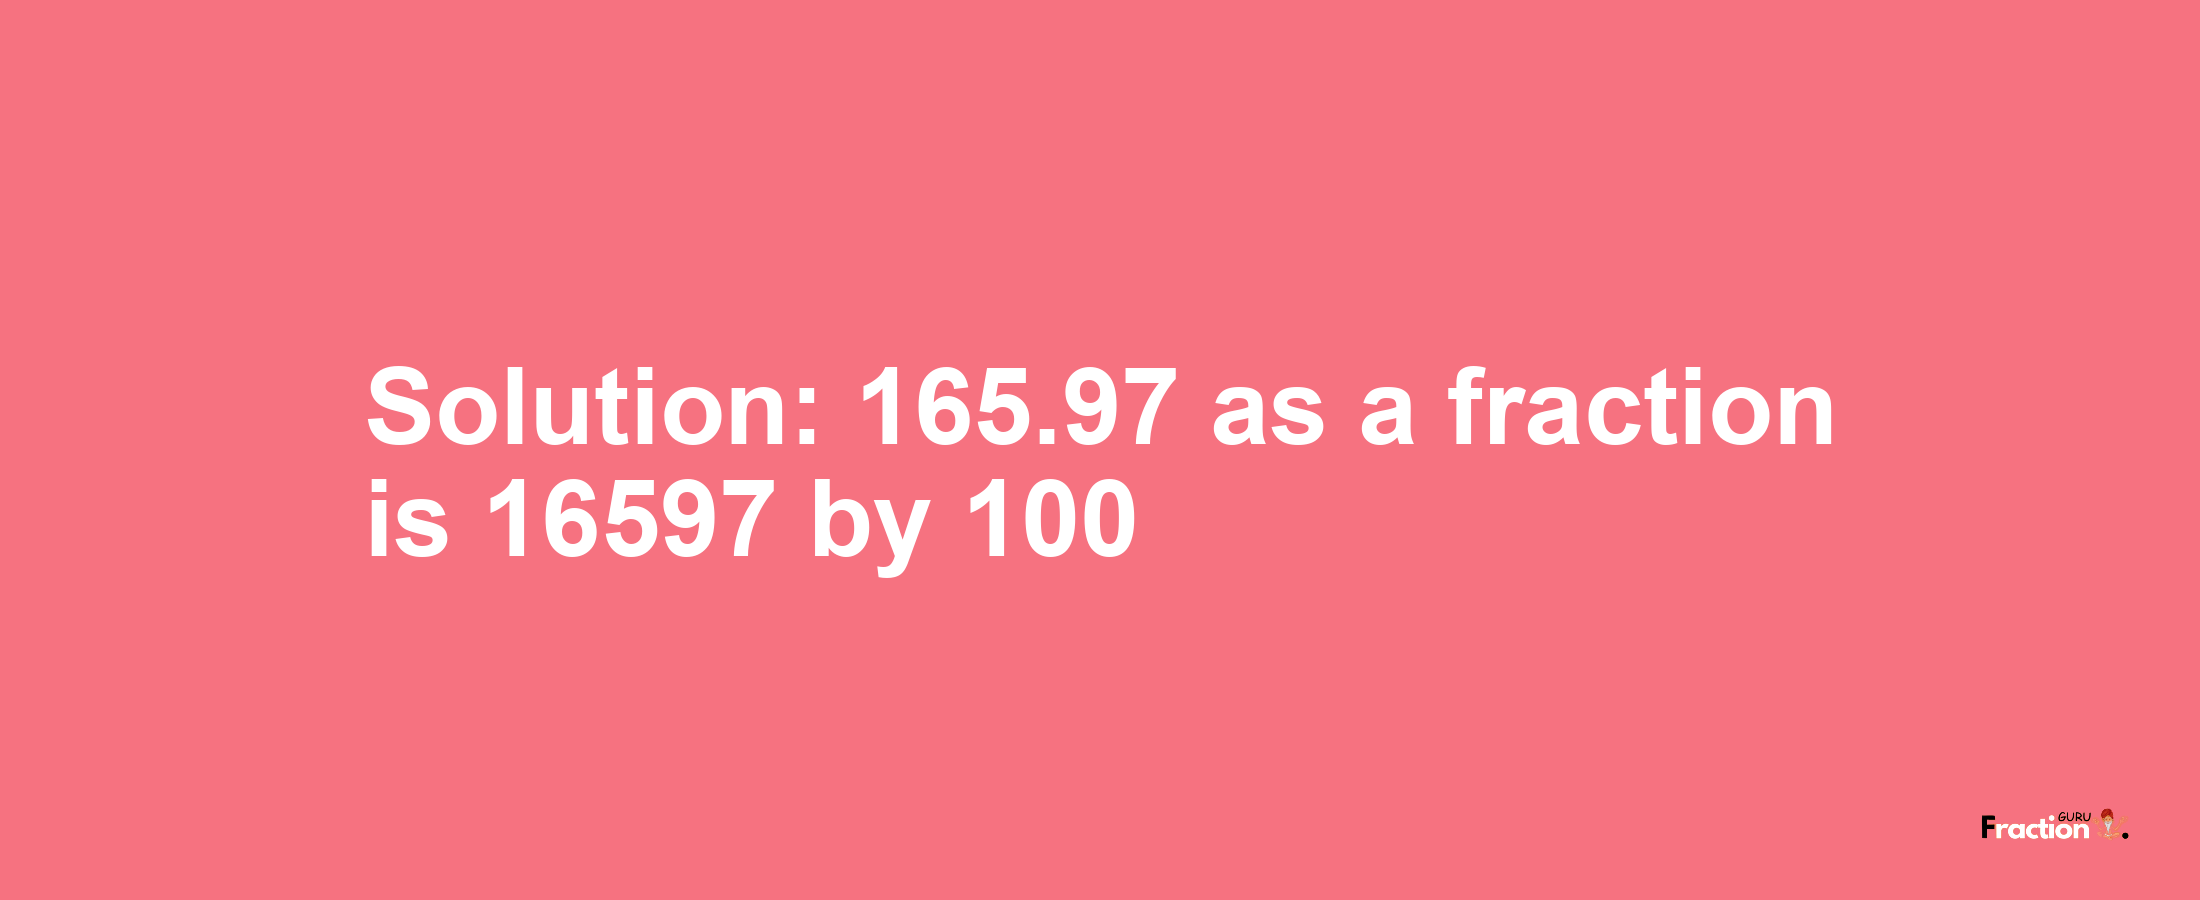 Solution:165.97 as a fraction is 16597/100